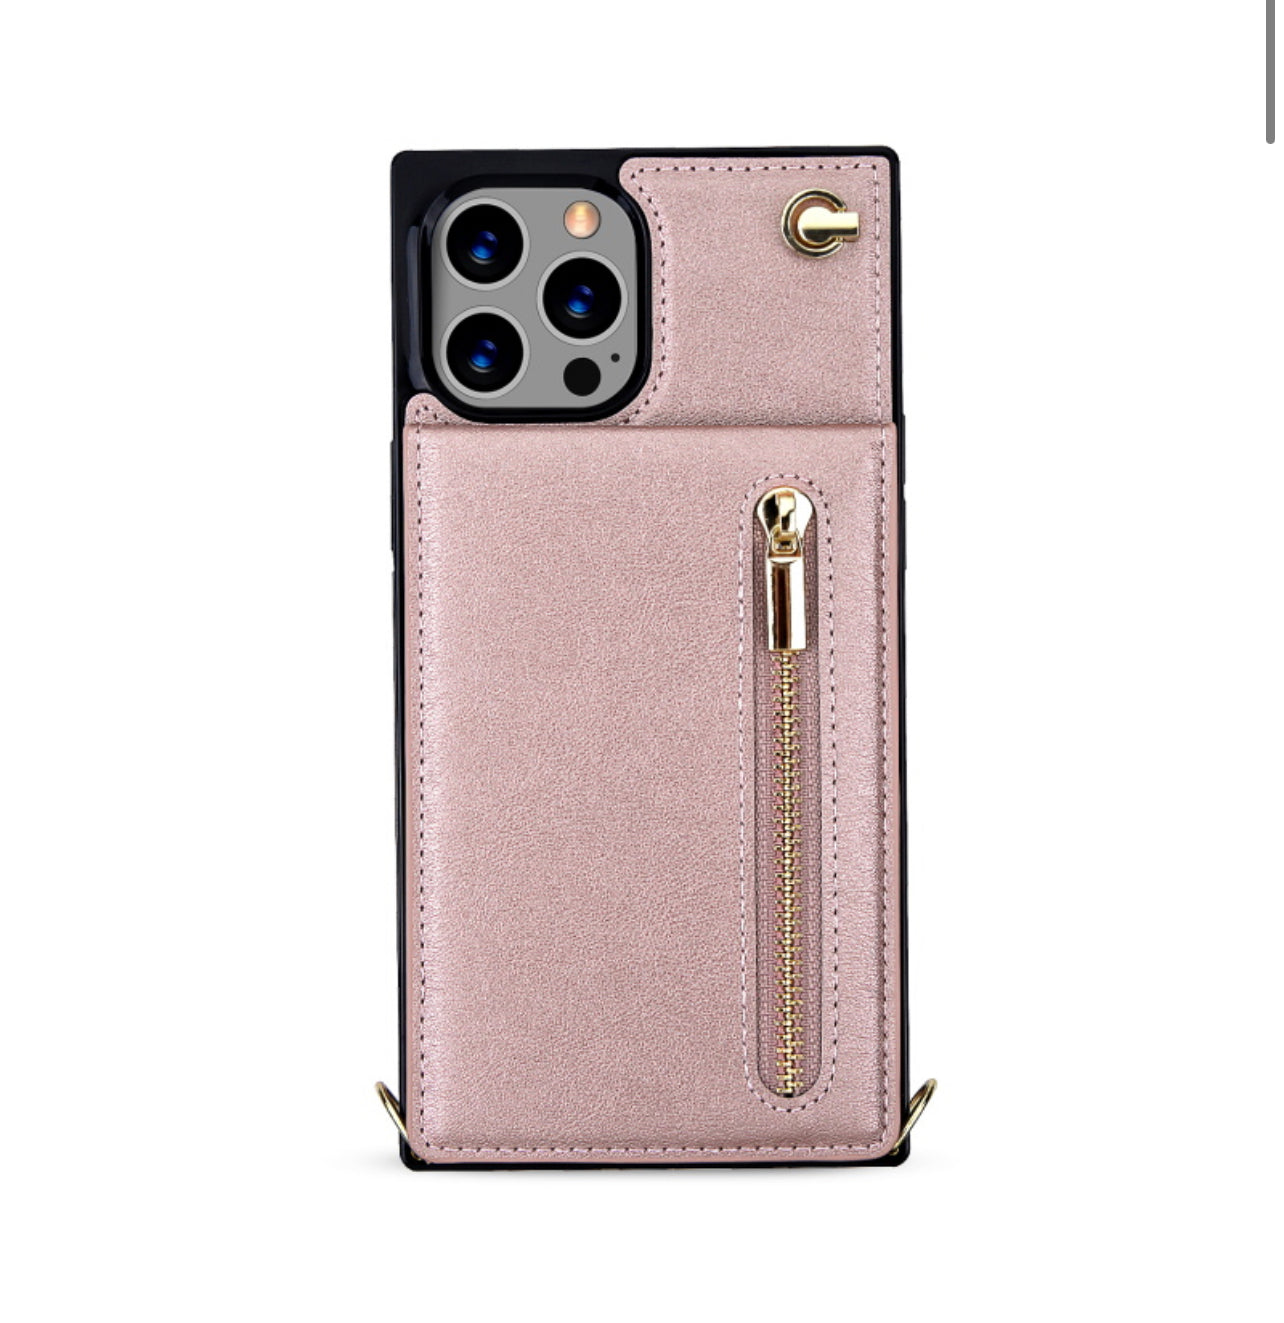 MyBat Suspend Wallet Cover (with Lanyard) for Apple iPhone 13 Pro Max (6.7) - Rose Gold